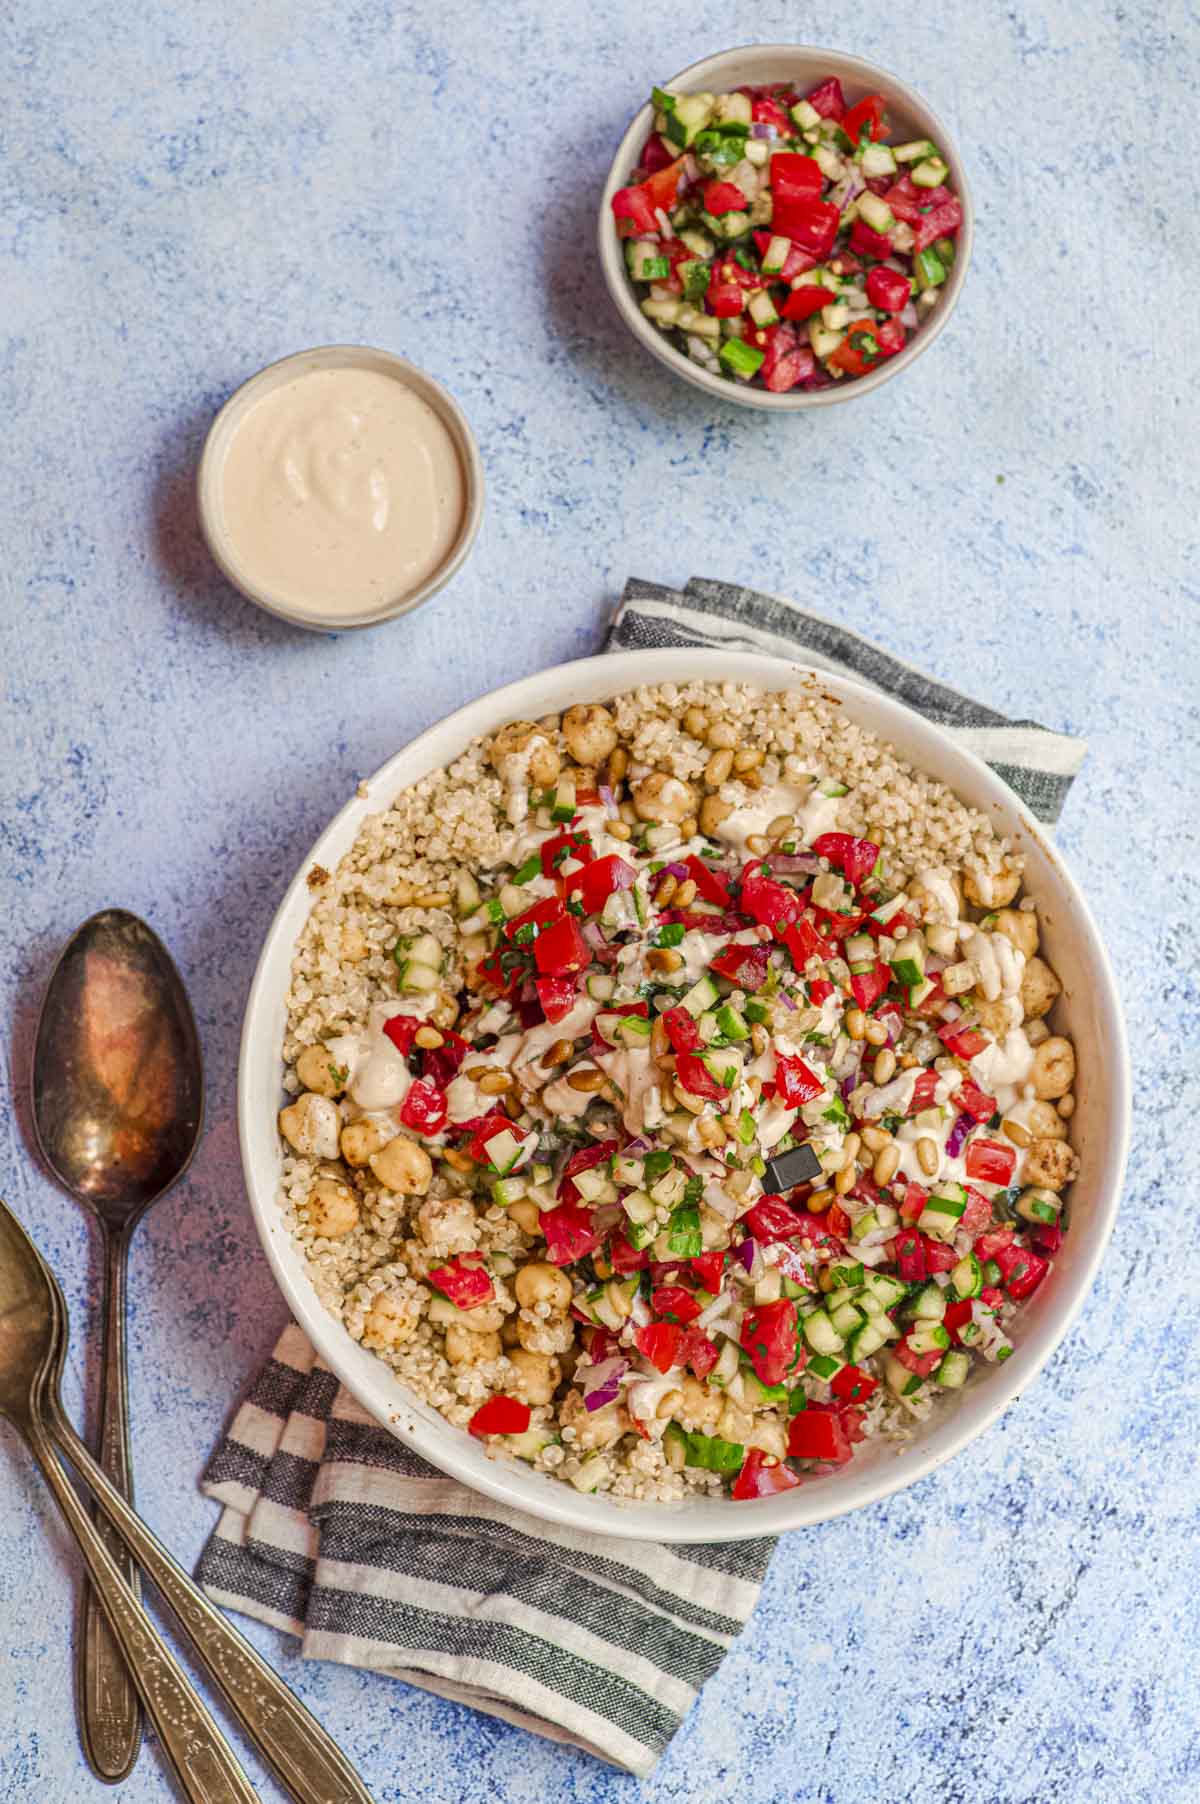 An Israeli salad Quinoa bowl next to a small bowl with tahini dressing